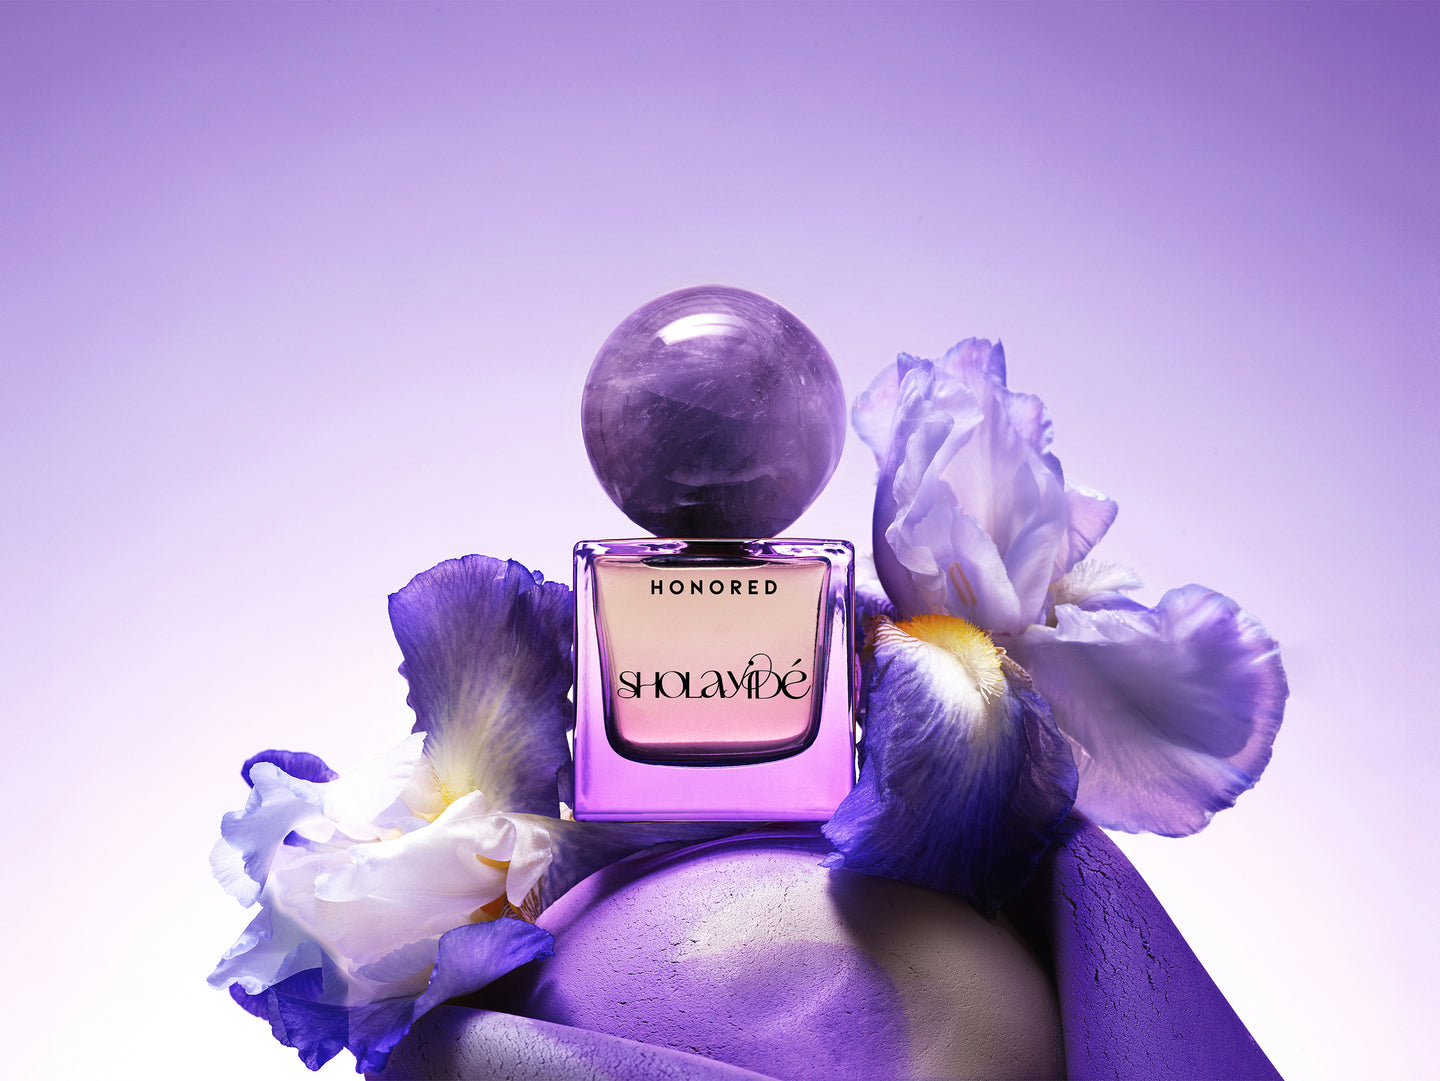 HONORED eco-luxe eau de parfum by SHOLAYIDÉ paired with violet Iris flowers and an amethyst crystal.